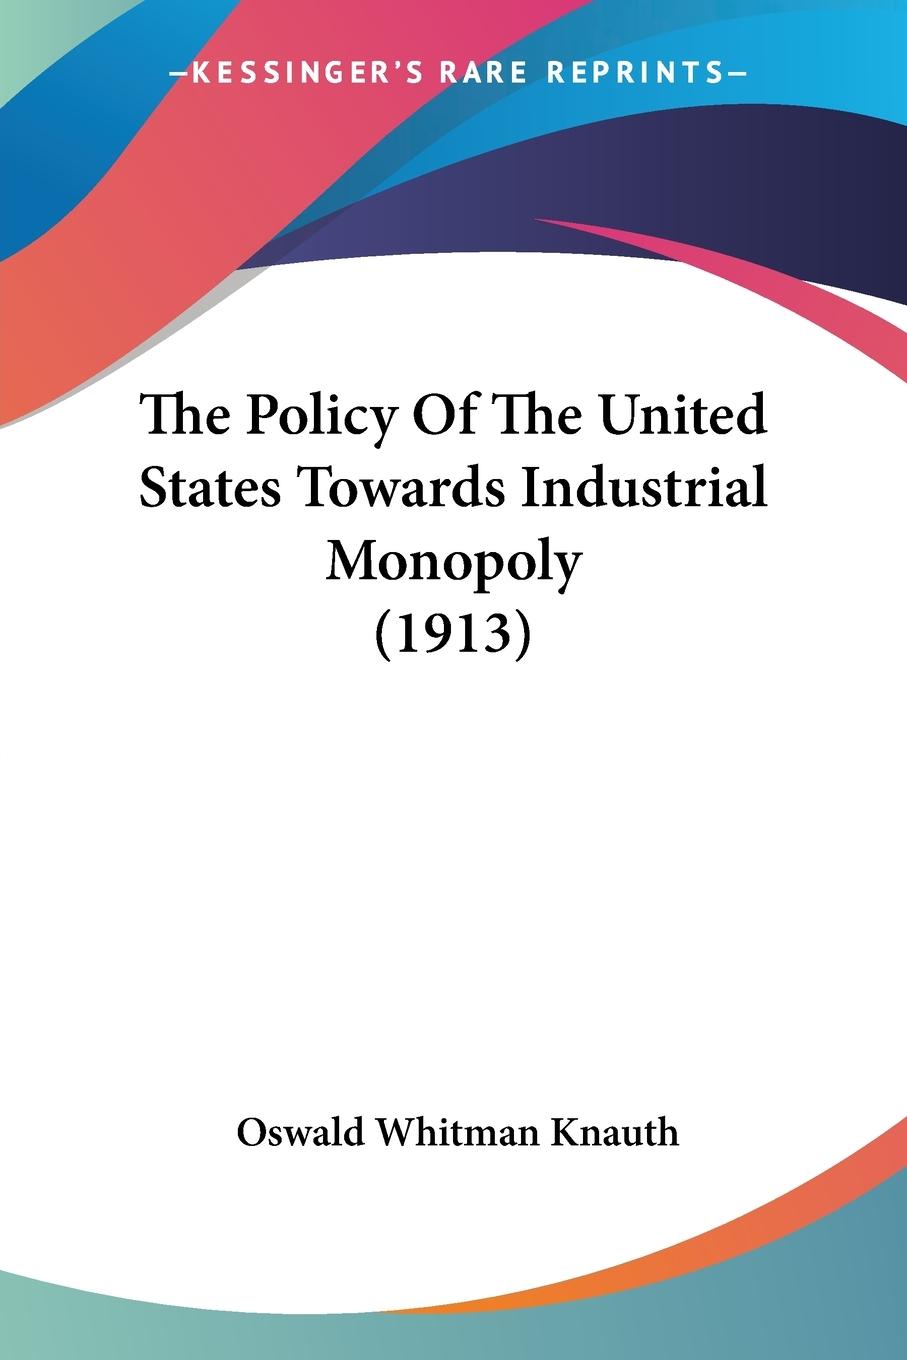 The Policy Of The United States Towards Industrial Monopoly (1913) - Knauth, Oswald Whitman